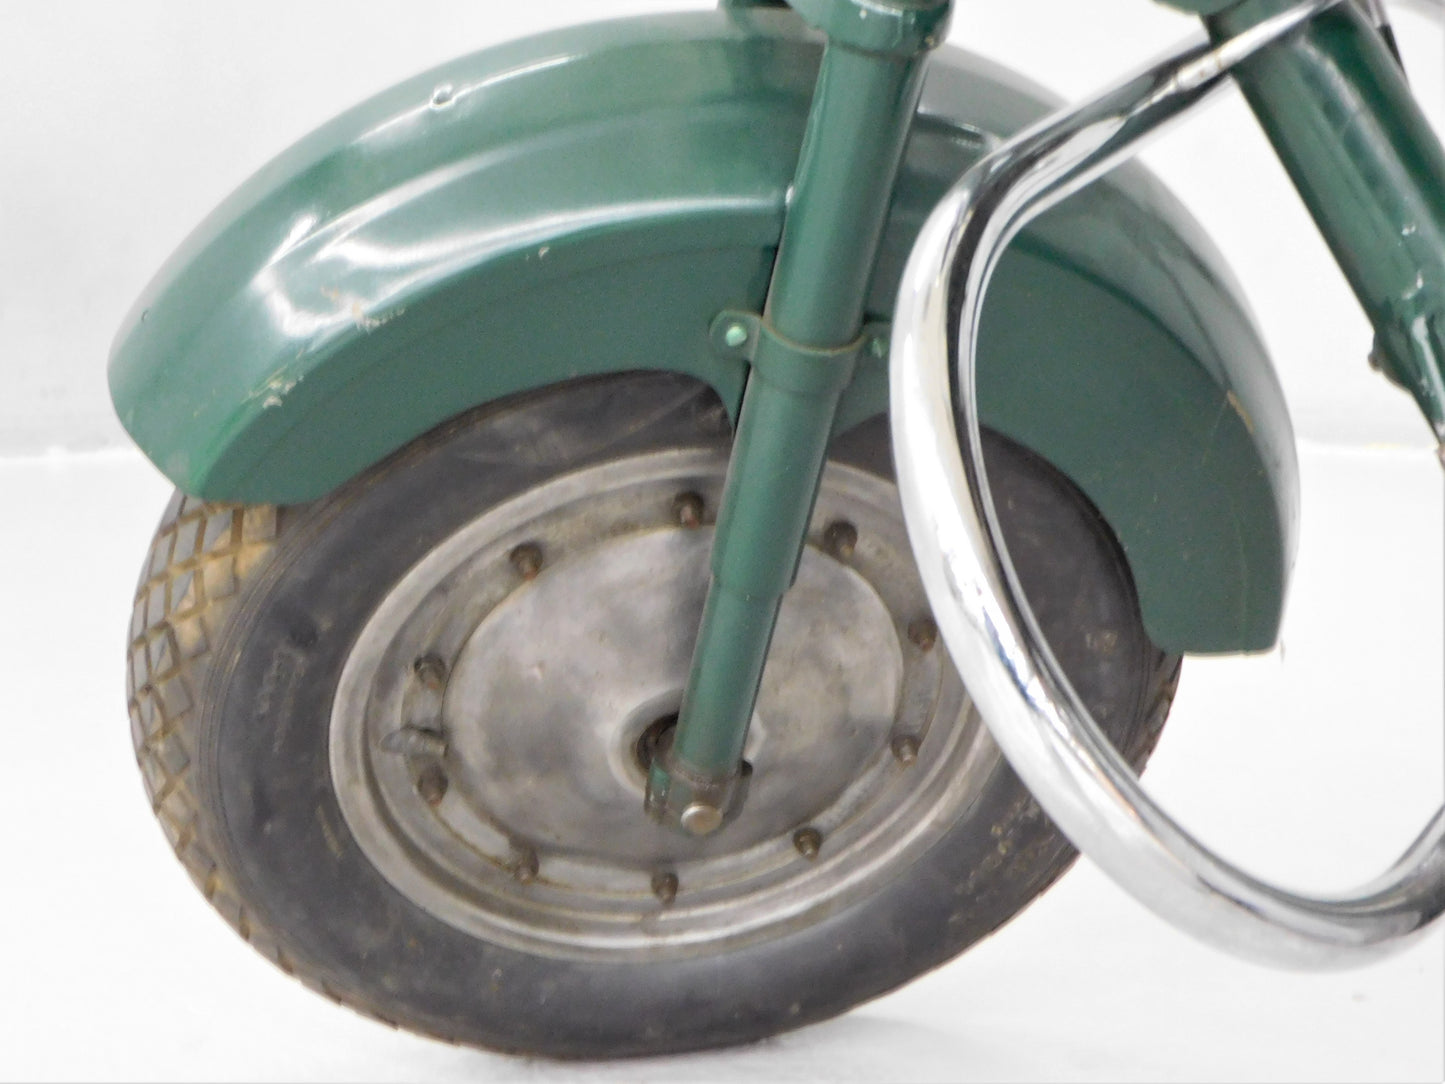 1950 Powell P-81 Scooter